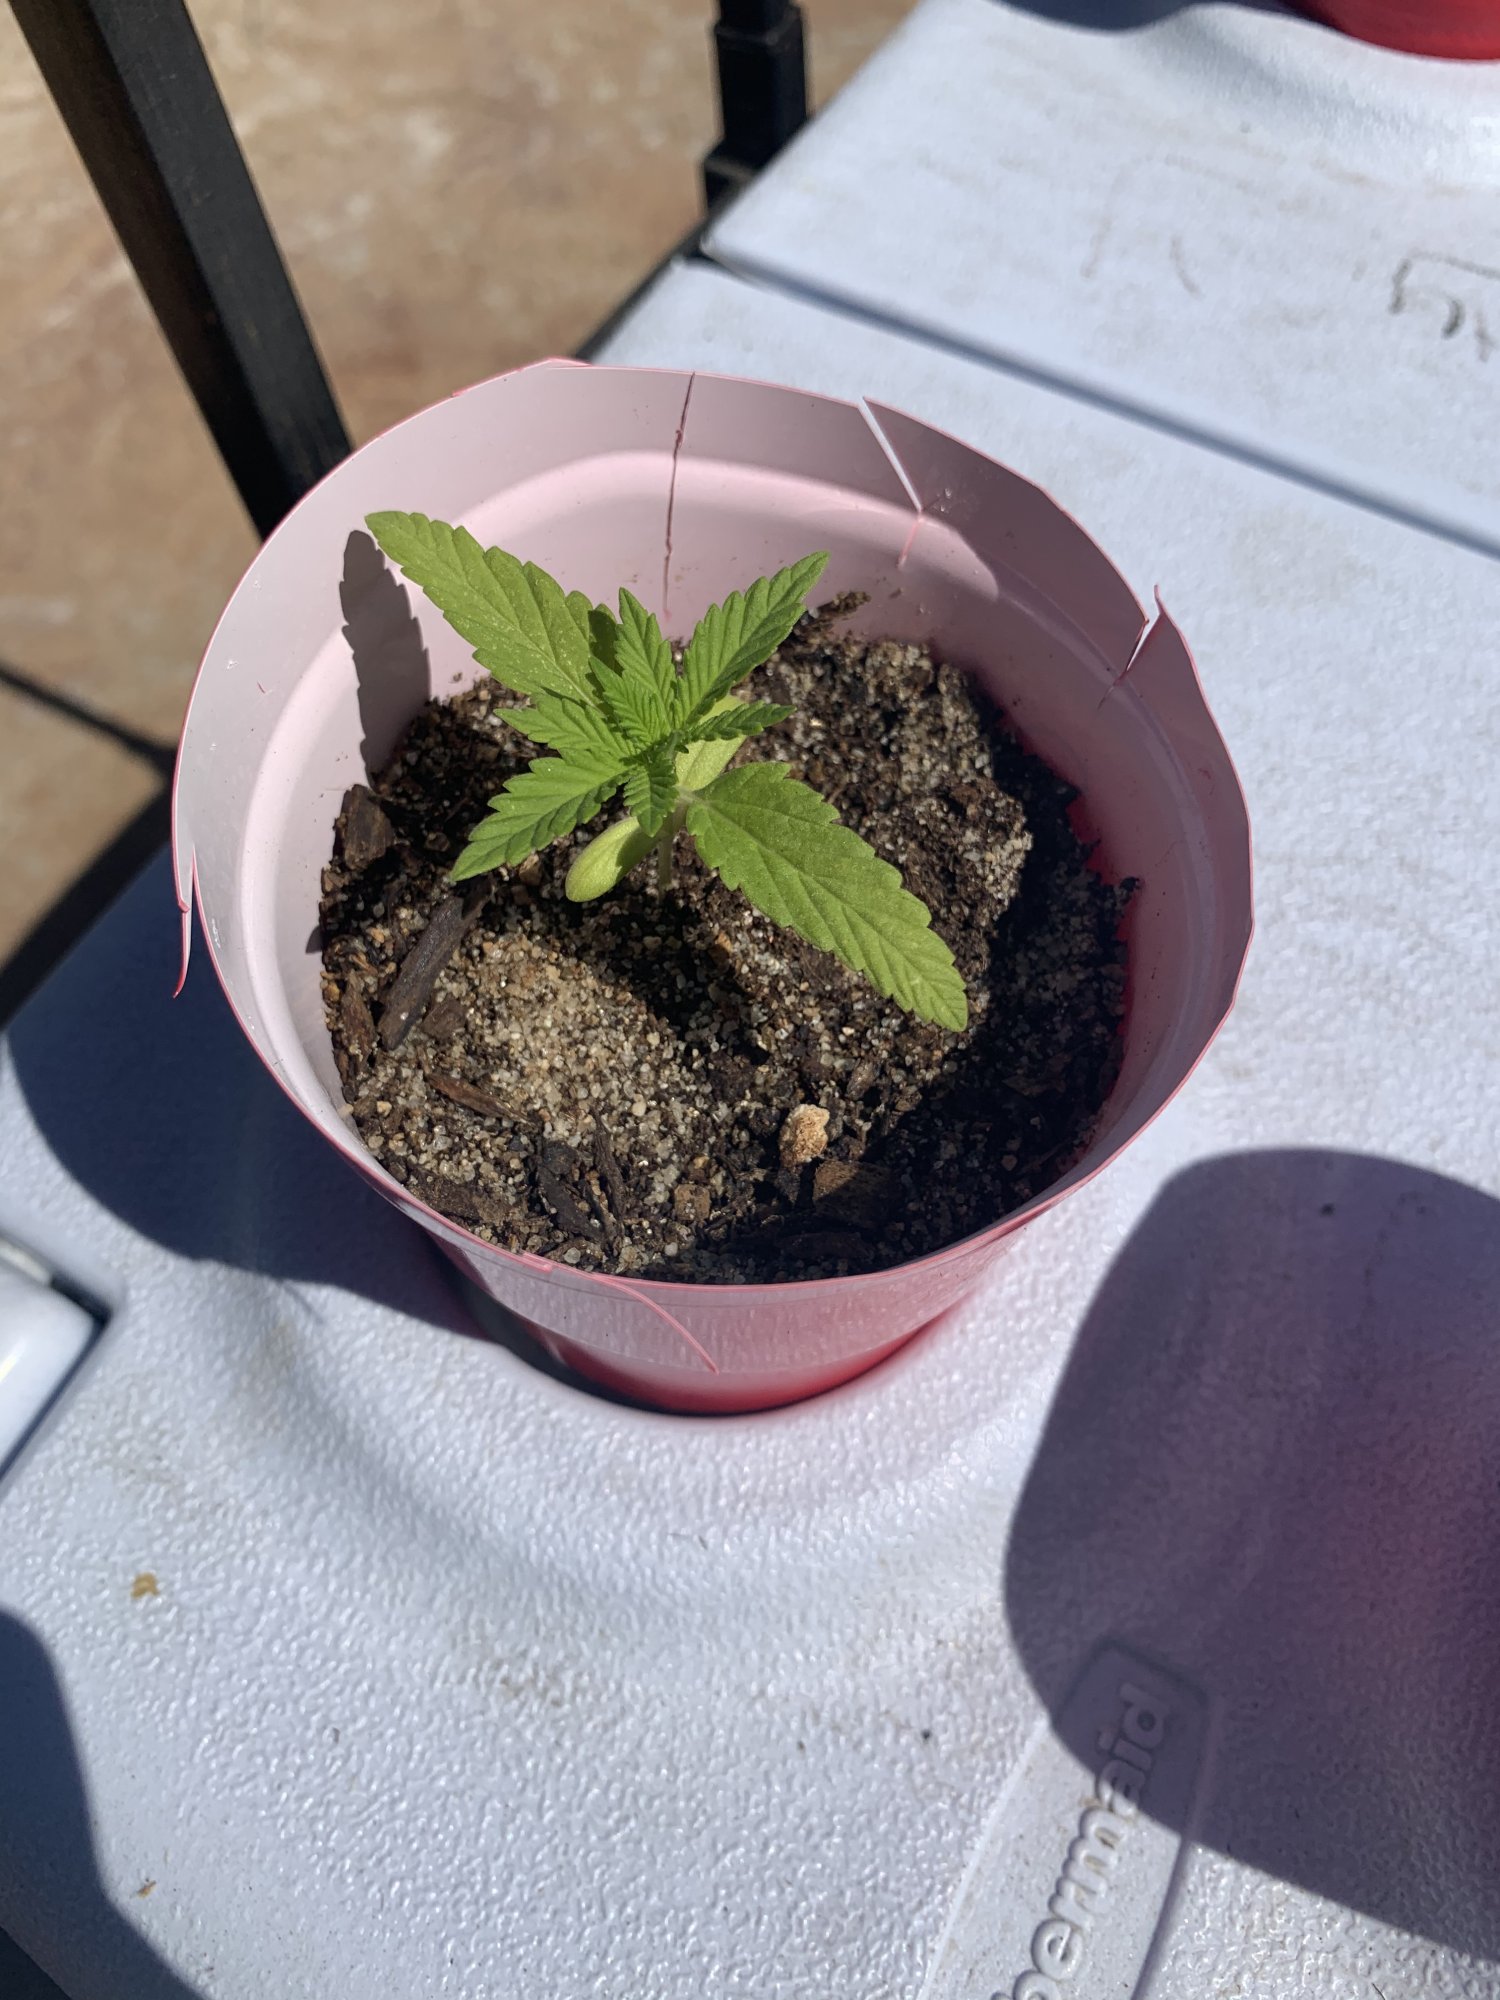 Update first time grower advice please